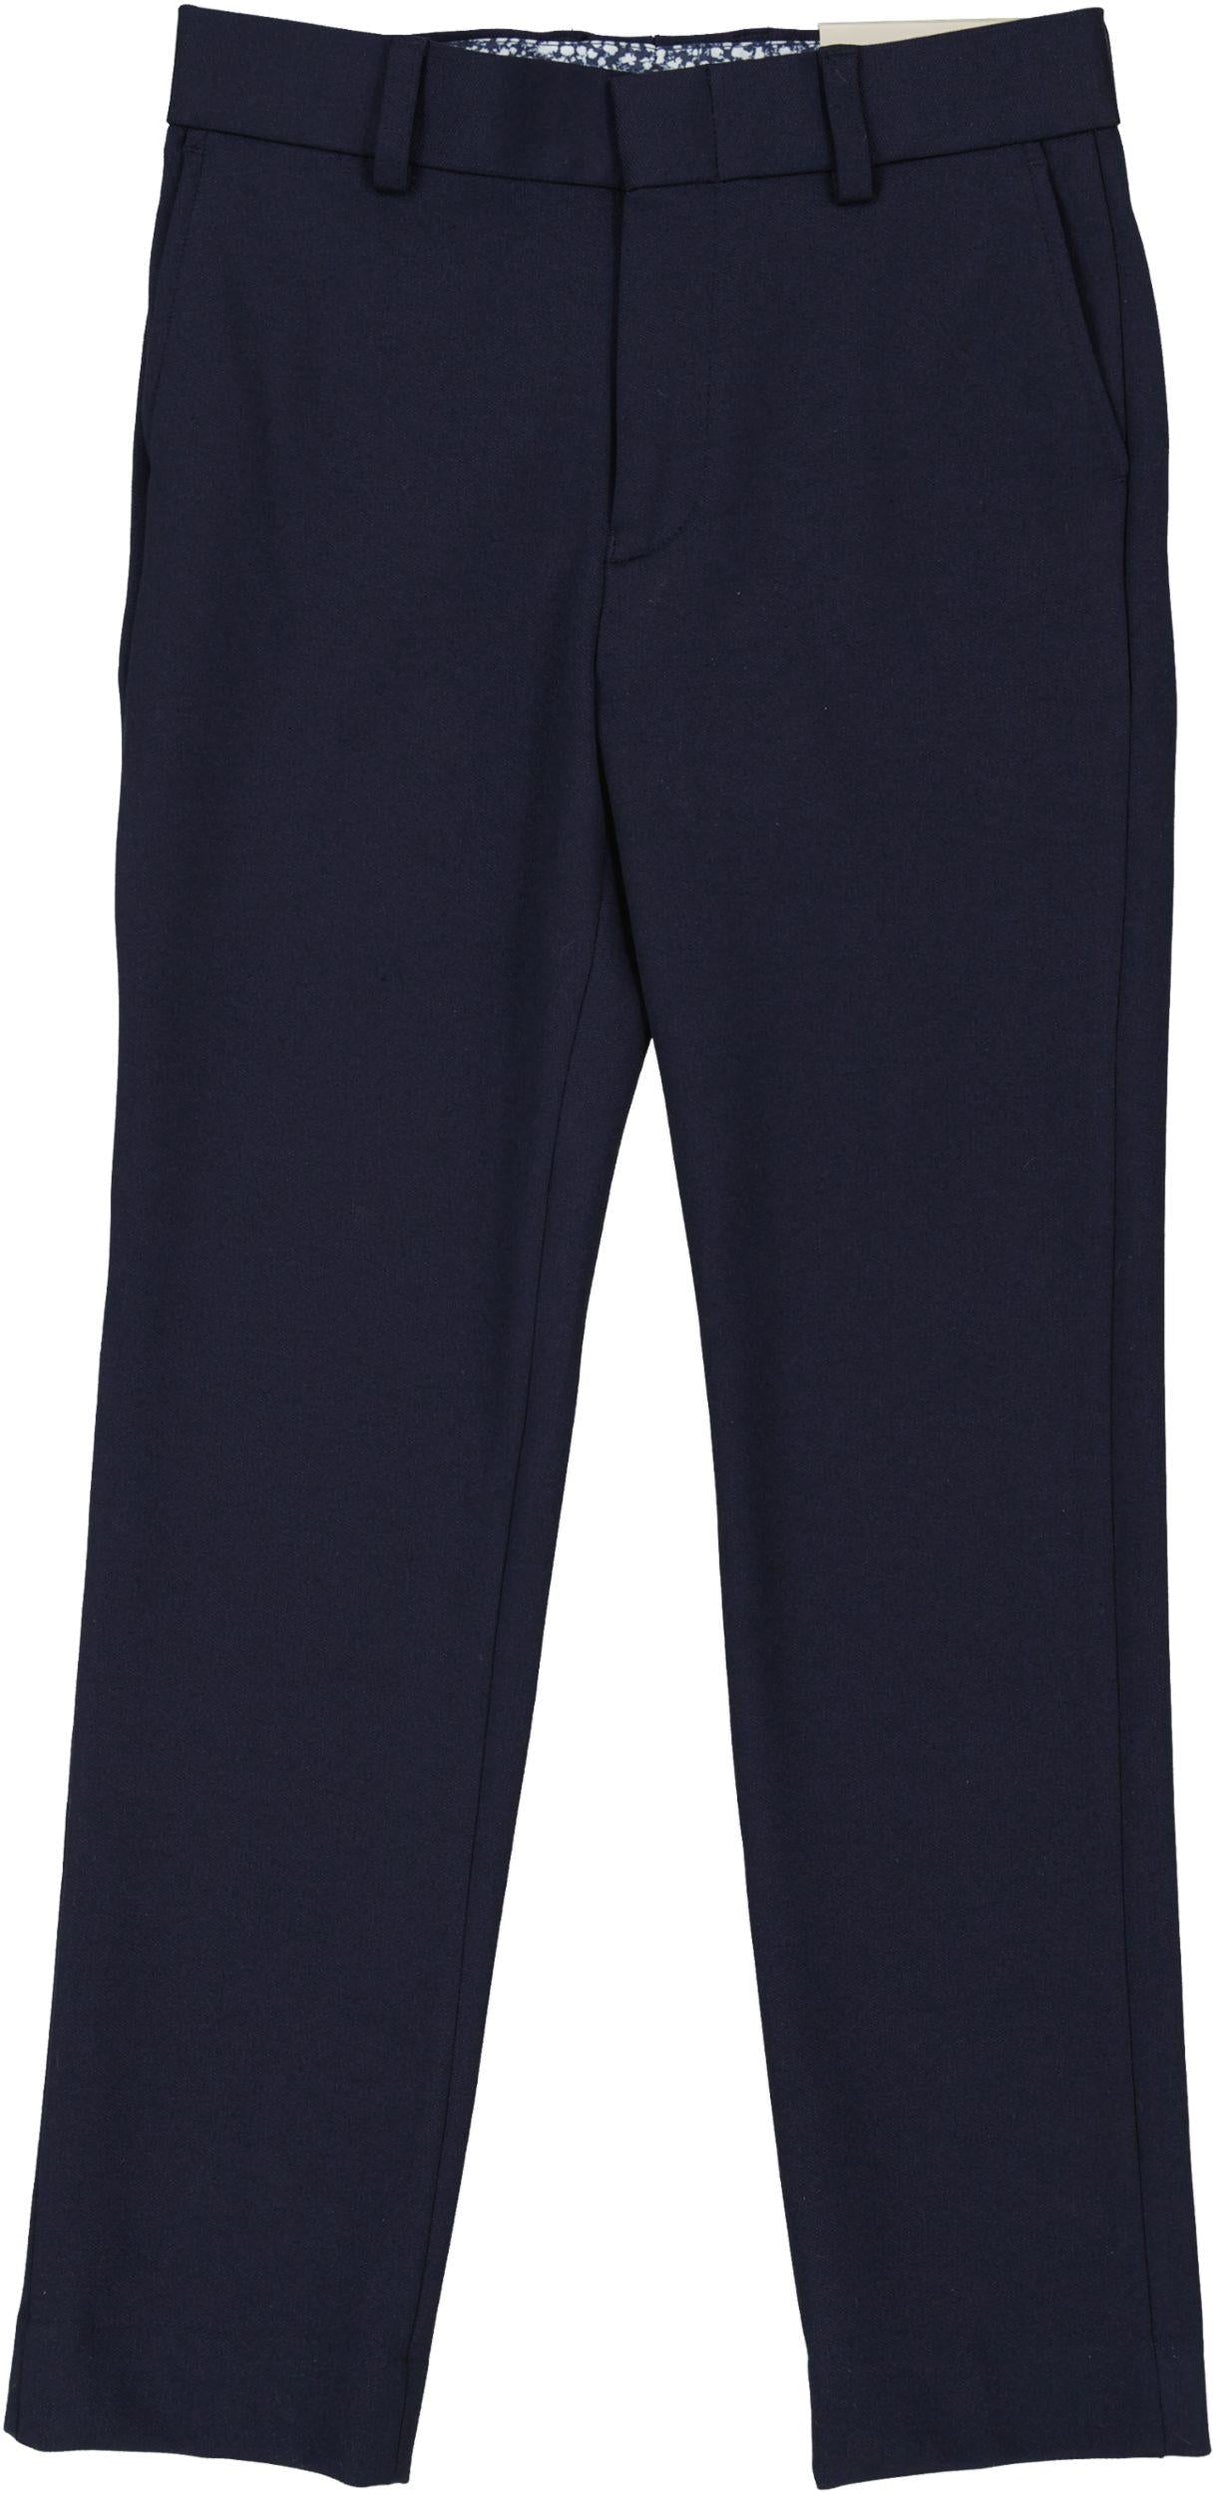 T.O. Collection Boys Navy Texture Soho Stretch Suit Separates - 9131-2B